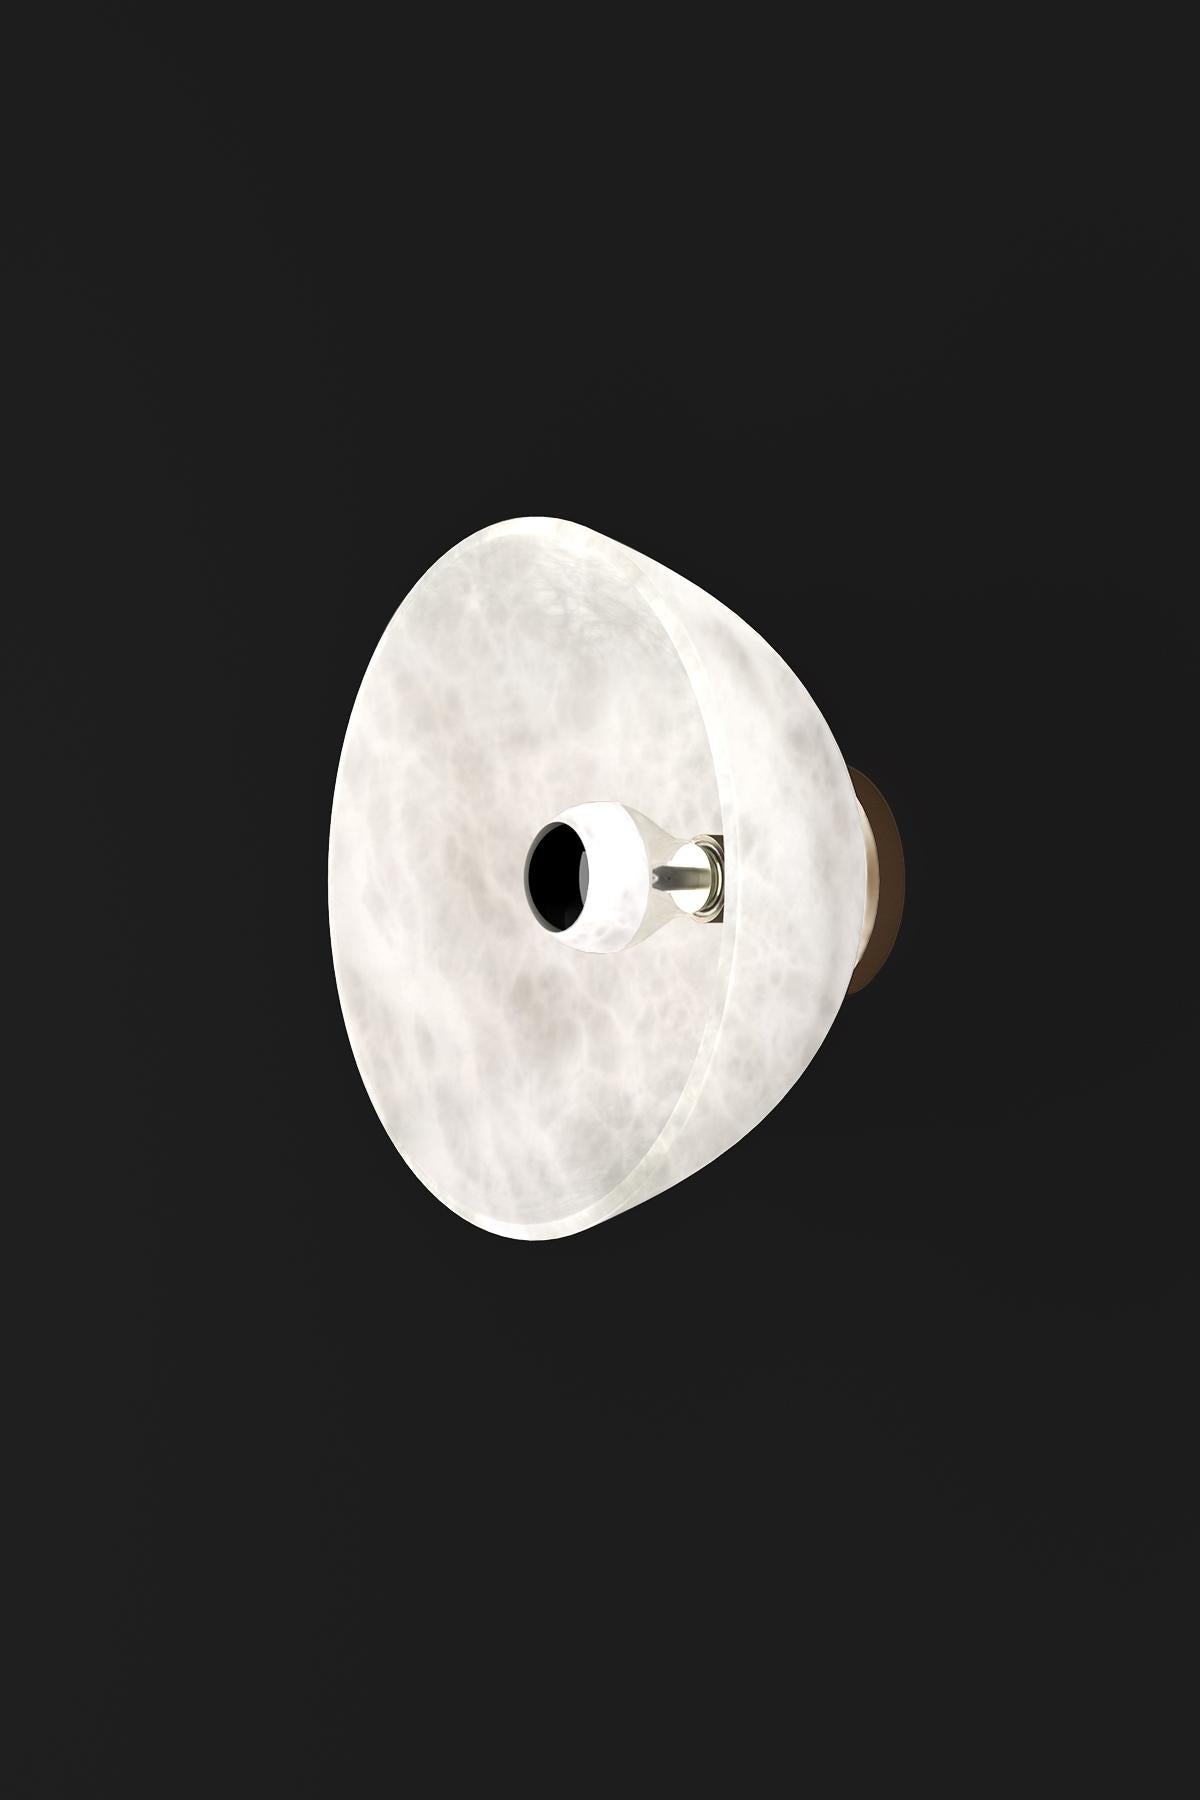 Apollo Bronze Wall Lamp by Alabastro Italiano
Dimensions: Ø 30 x W 17,5 cm.
Materials: White alabaster and bronze.

Available in different finishes: Shiny Silver, Bronze, Brushed Brass, Ruggine of Florence, Brushed Burnished, Shiny Gold, Brushed